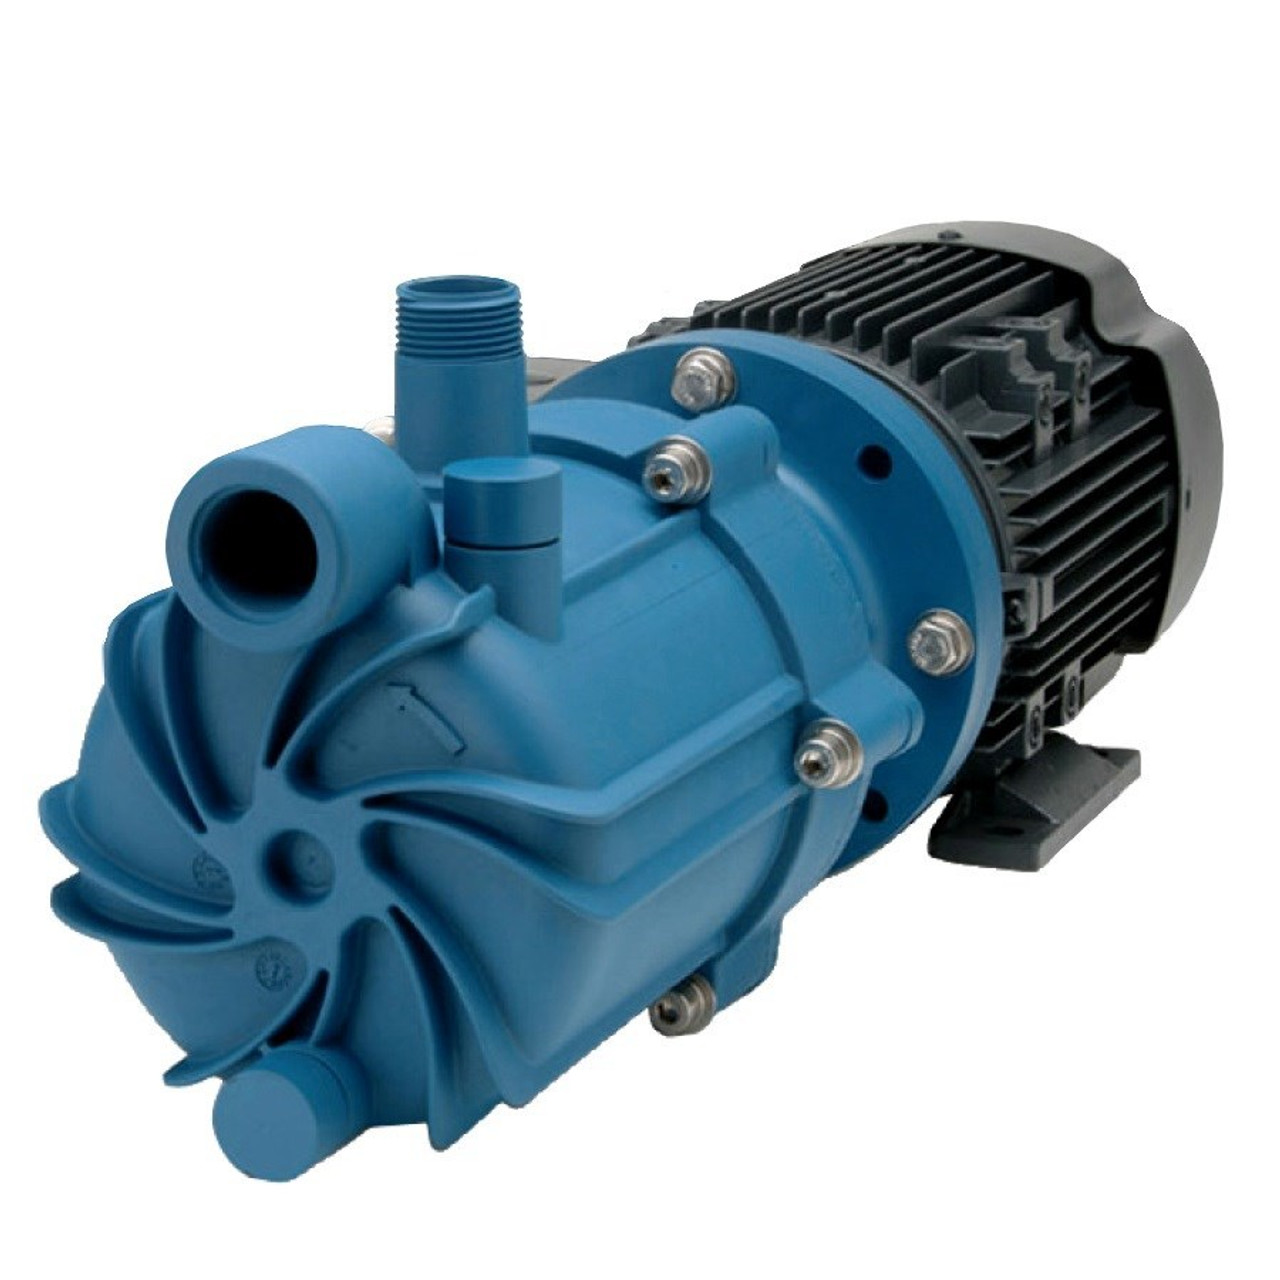 Serfilco Magnetic Coupled Pumps